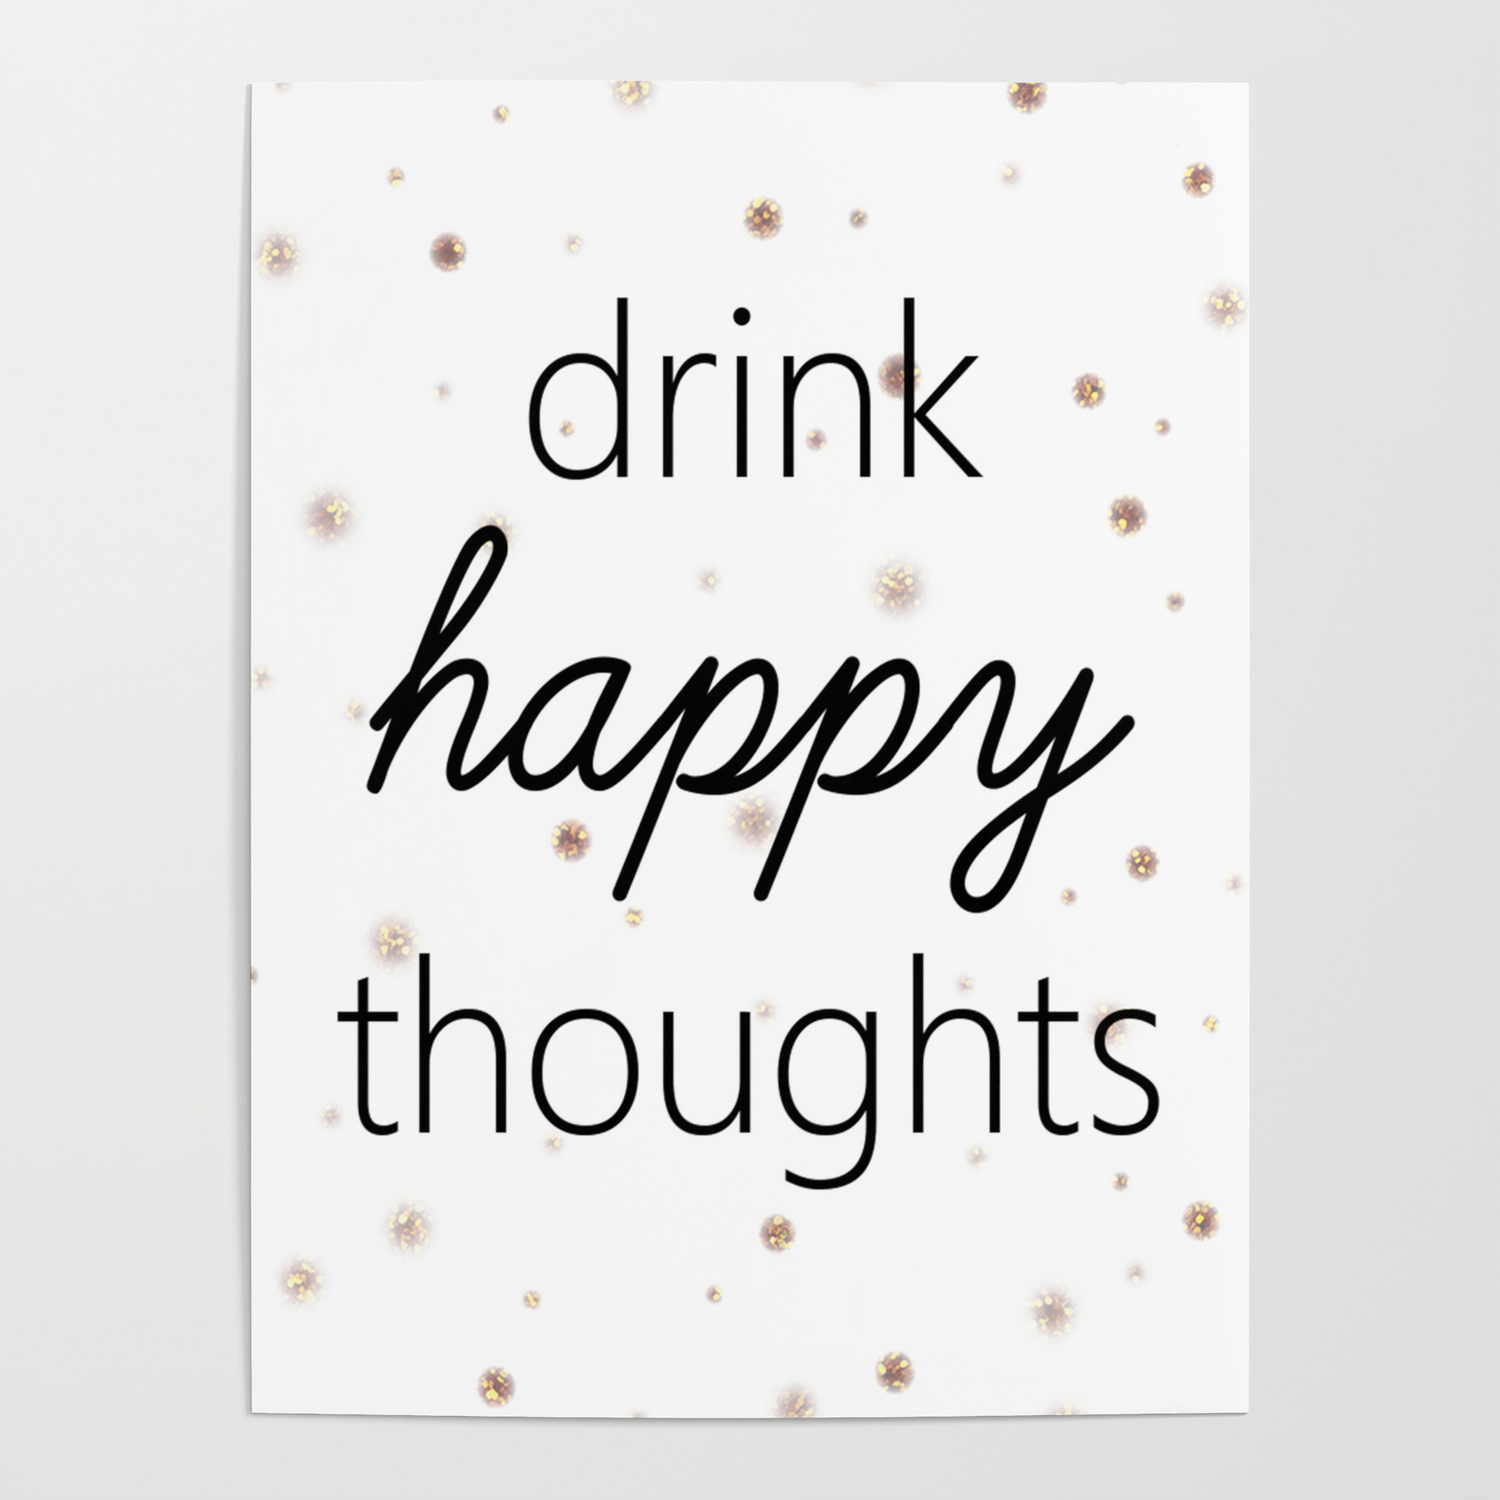 Drink happy thoughts